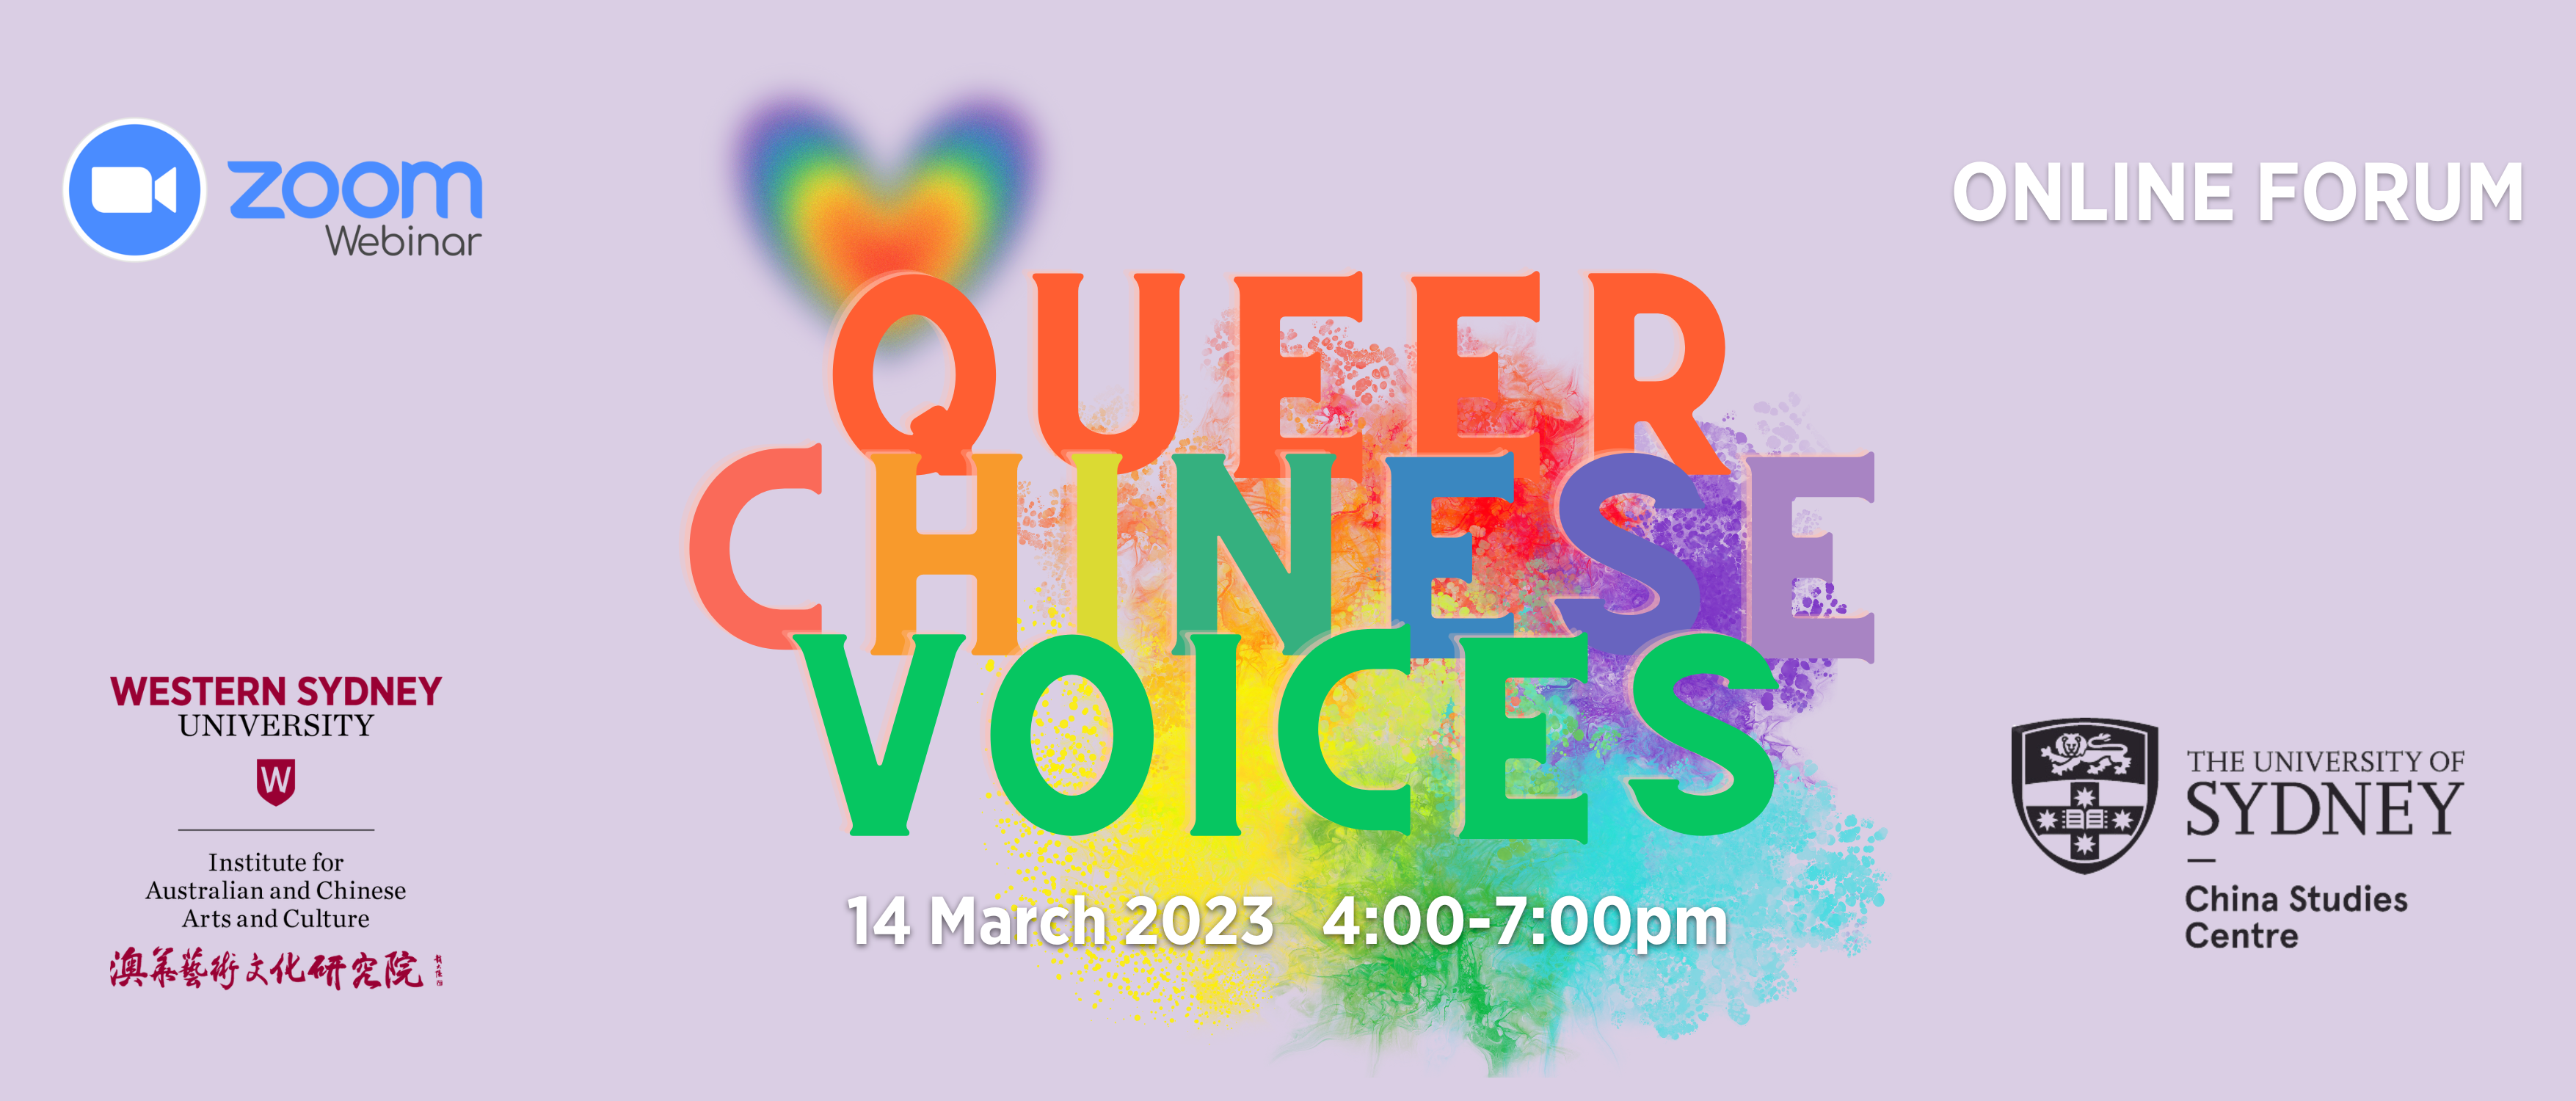 Queer Chinese Voices Forum 2023 (1170 × 500 px)